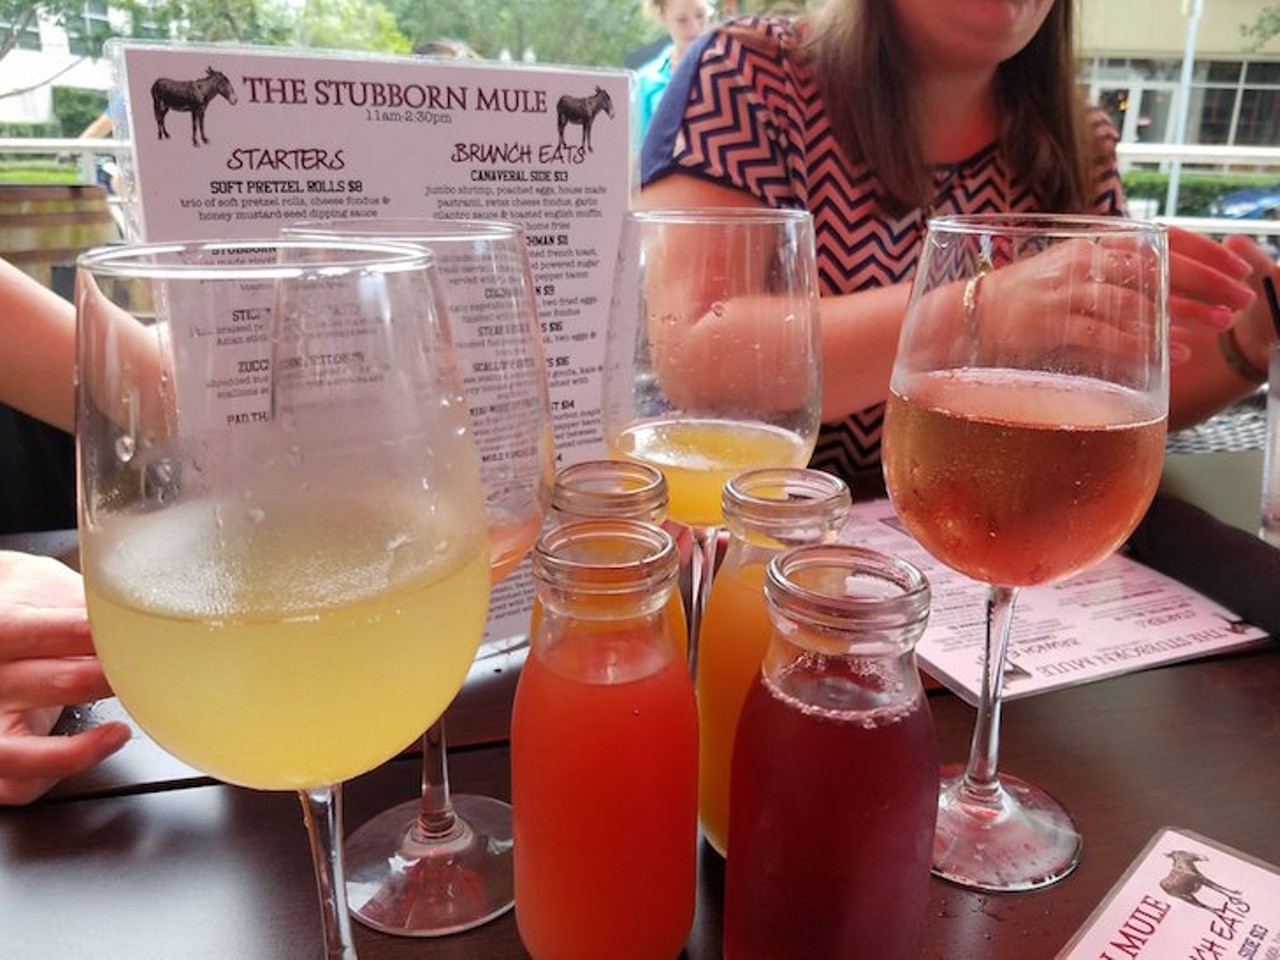 The Stubborn Mule  
100 S. Eola Drive, 407-730-3400
With a pet-friendly porch, this location is perfect for brunch and pups. Brunch is served from 11 a.m. to 2:30 p.m. with bottomless mimosas being $14.
Photo via Yelp/Angelo R.